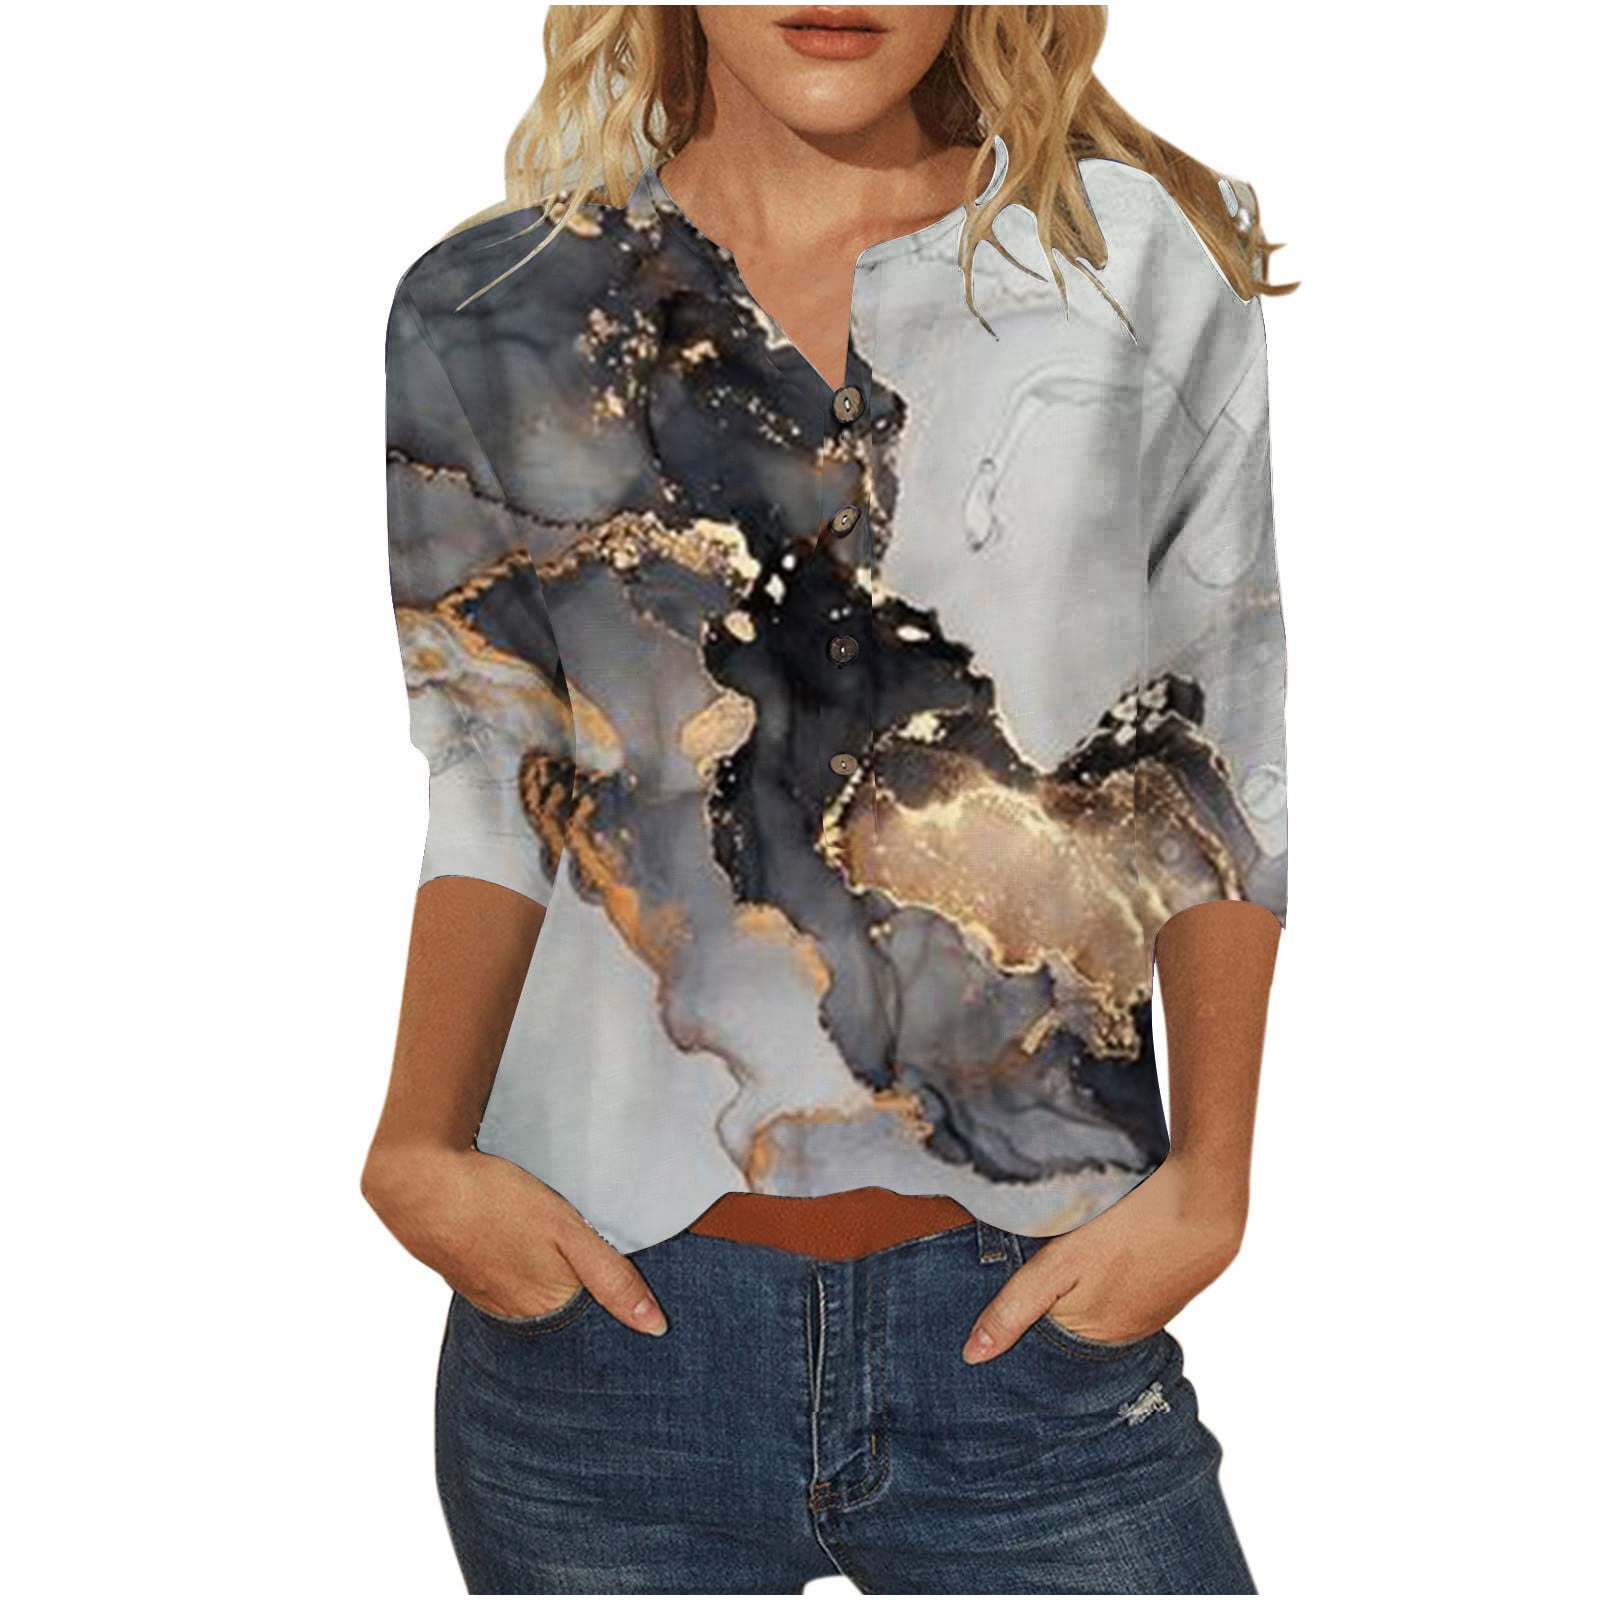 tklpehg Floral Tops for Women 3/4 Sleeve Buttons V Neck Butterfly Print ...